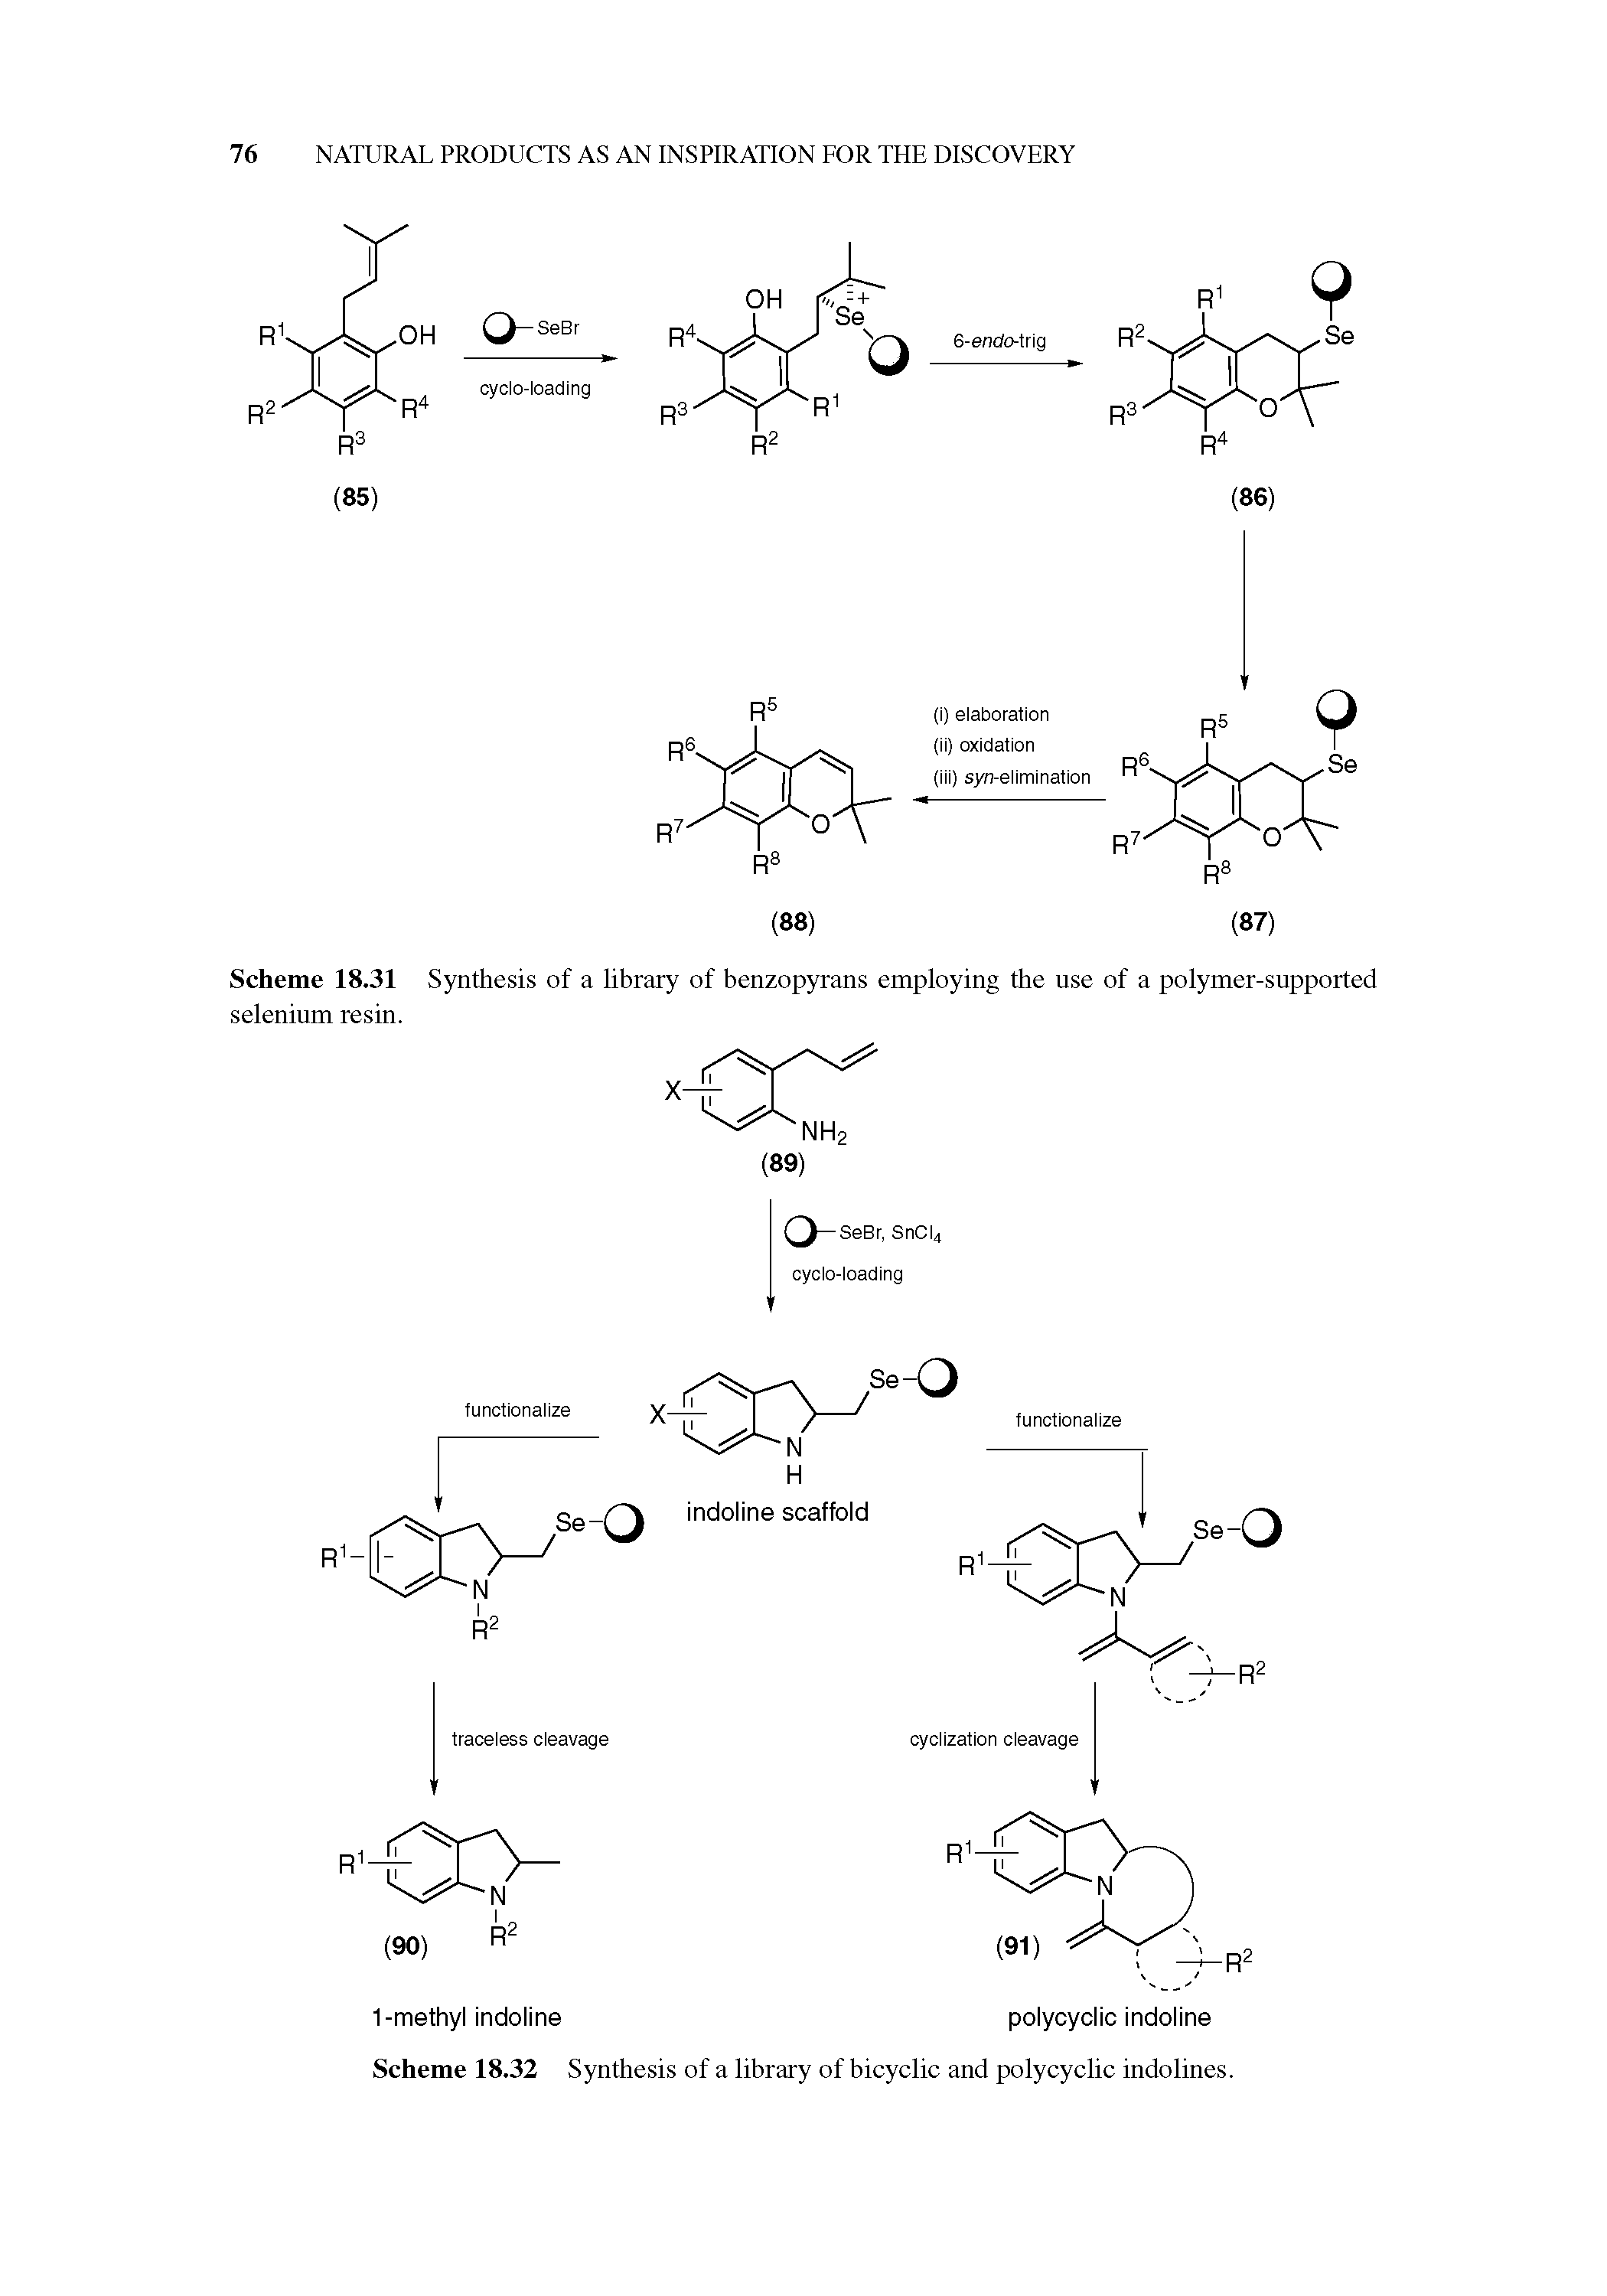 Scheme 18.31 Synthesis of a library of benzopyrans employing the use of a polymer-supported selenium resin.